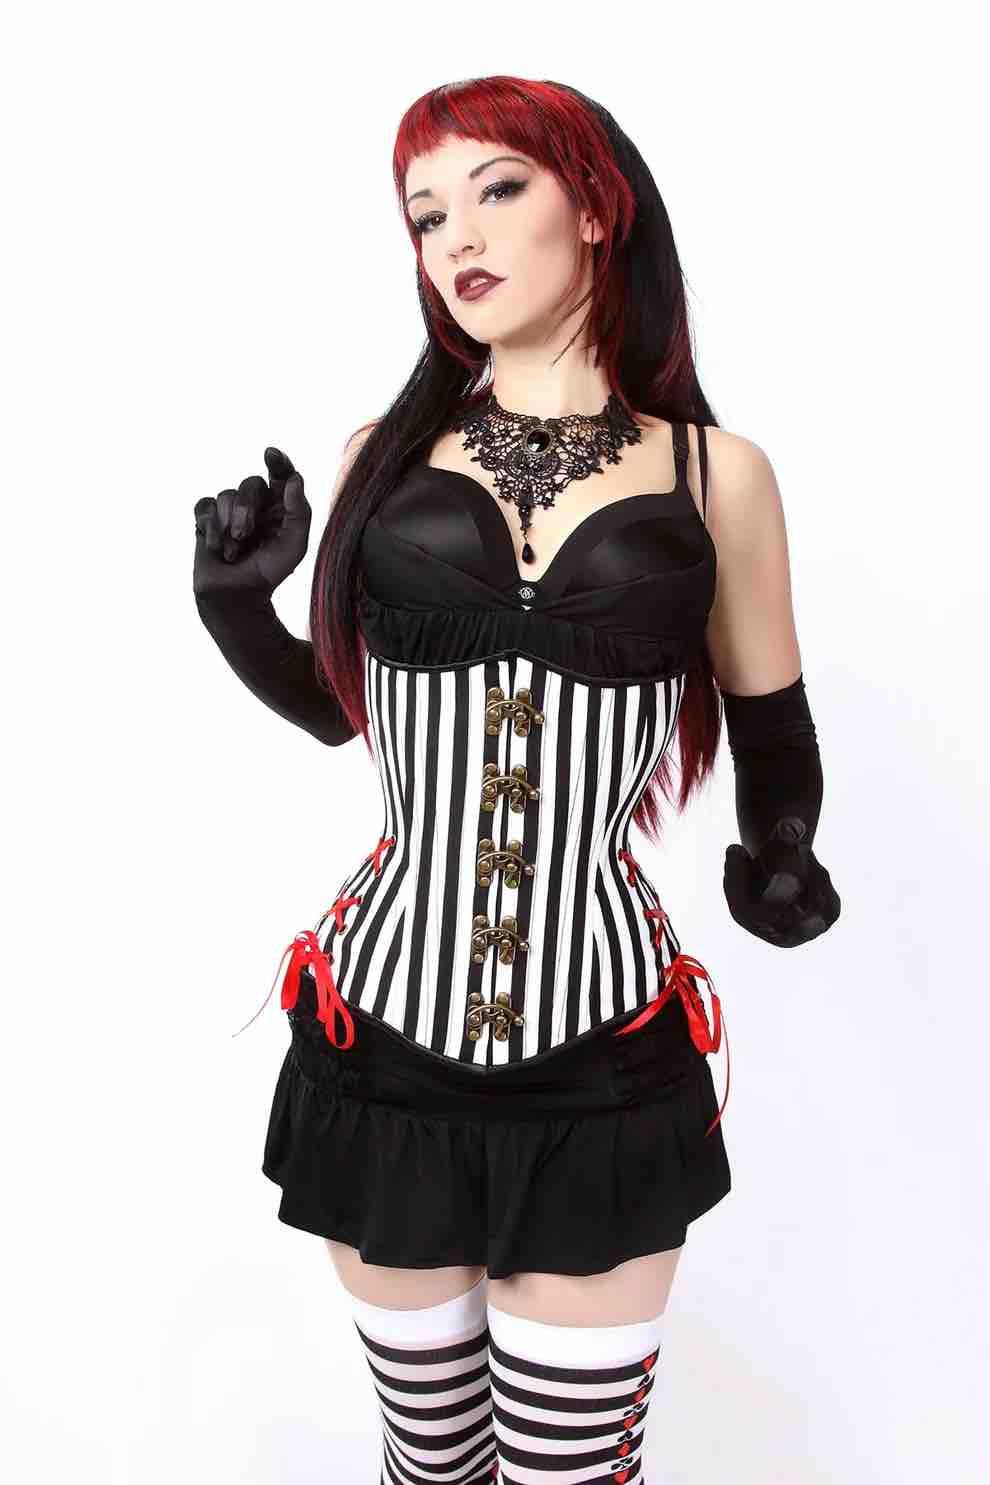 A model wearing the Circus Riot Longline Hourglass Cincher over a black bra and skirt.